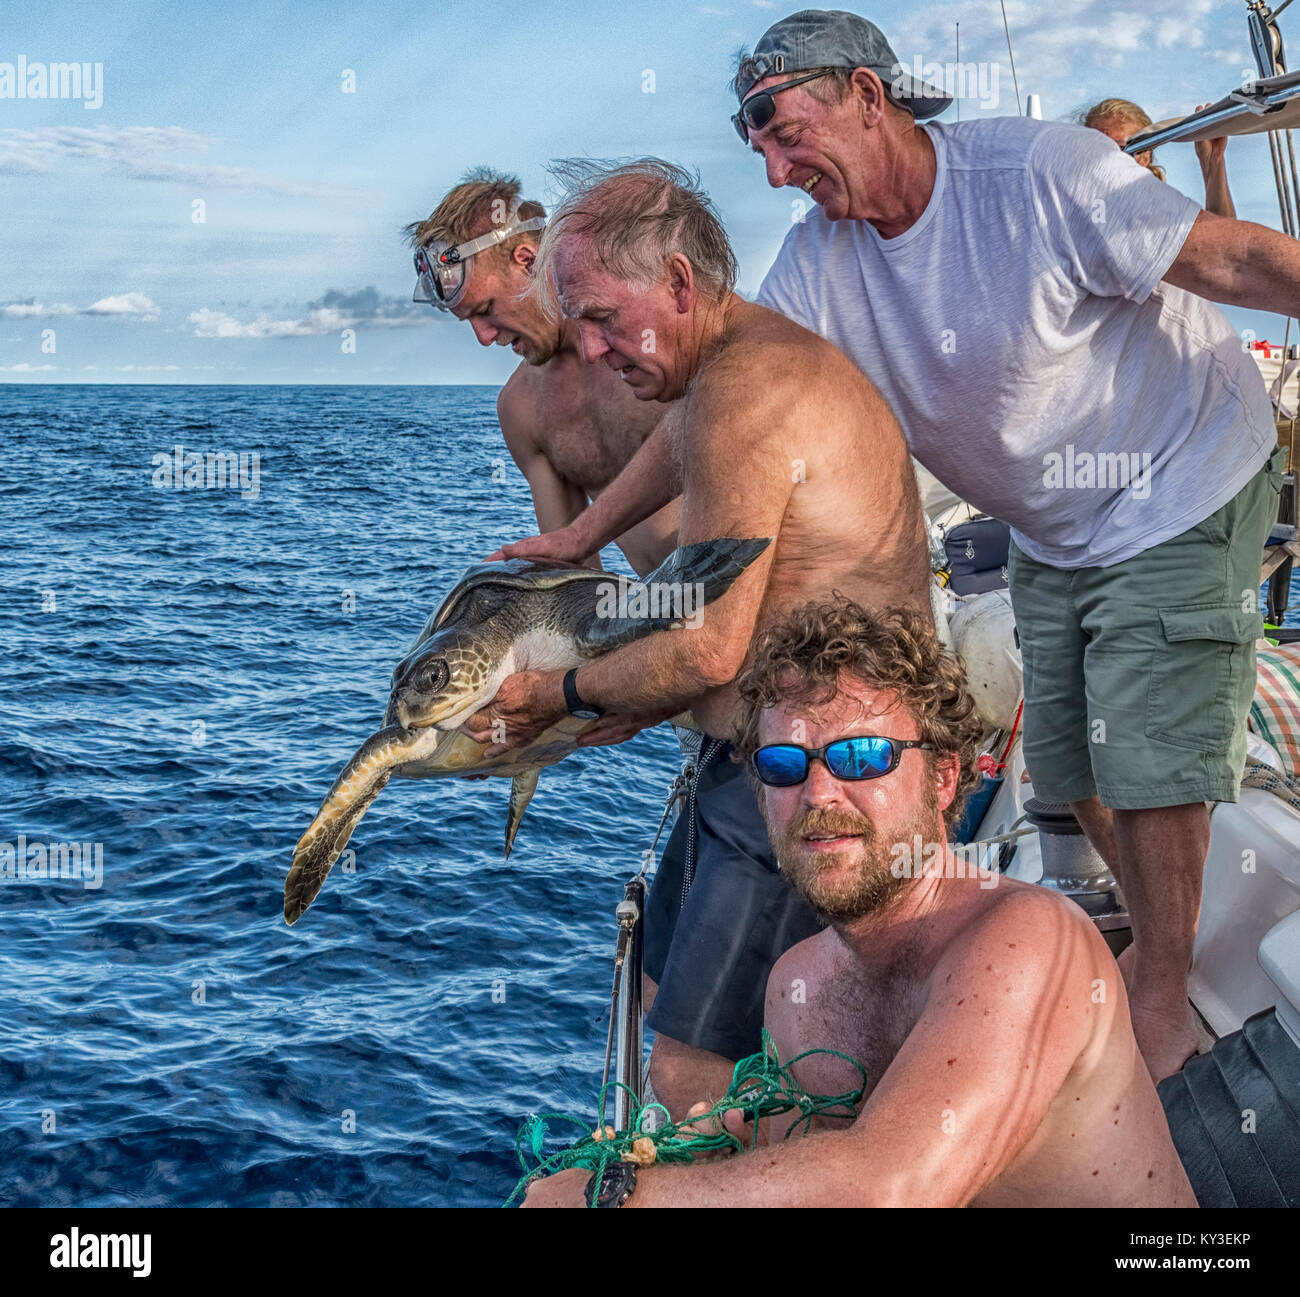 A Loggerhead Turtle Trapped in a Plastic Fishing Net in the Atlantic Ocean is rescued and set free by sailors on a passing sailing boat. Stock Photo